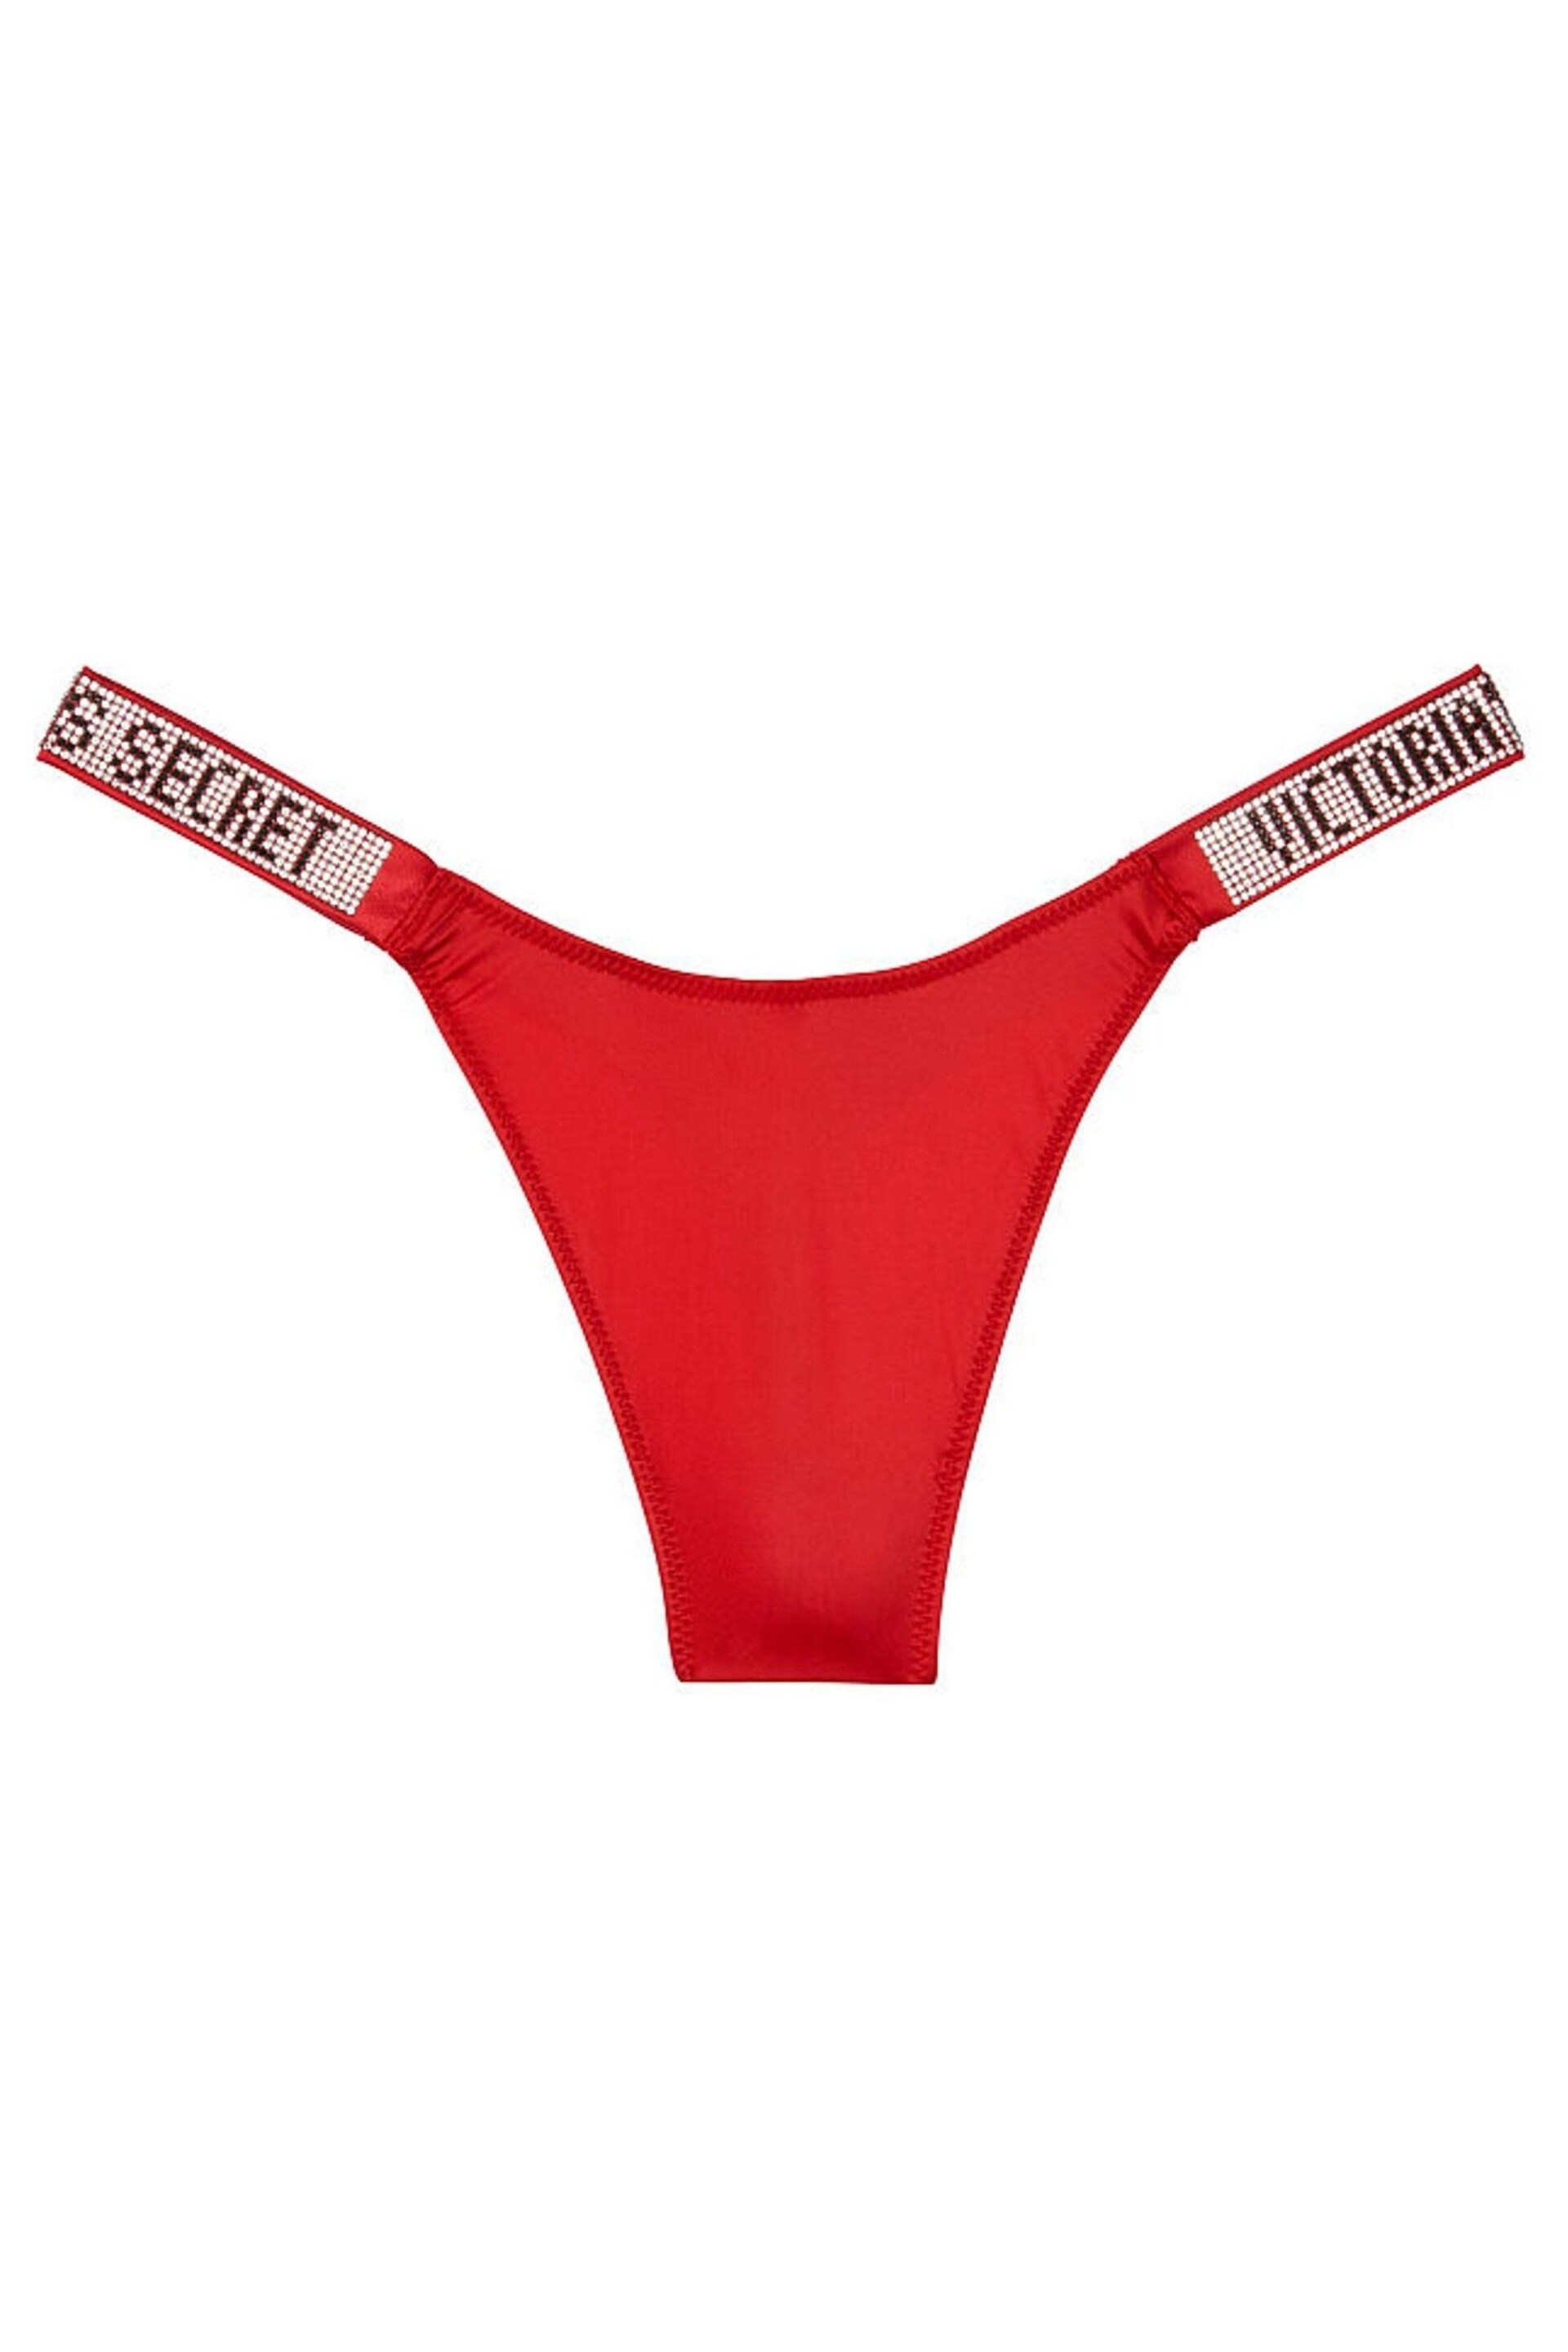 Victoria's Secret Lipstick Red Smooth Thong Shine Strap Knickers - Image 3 of 4